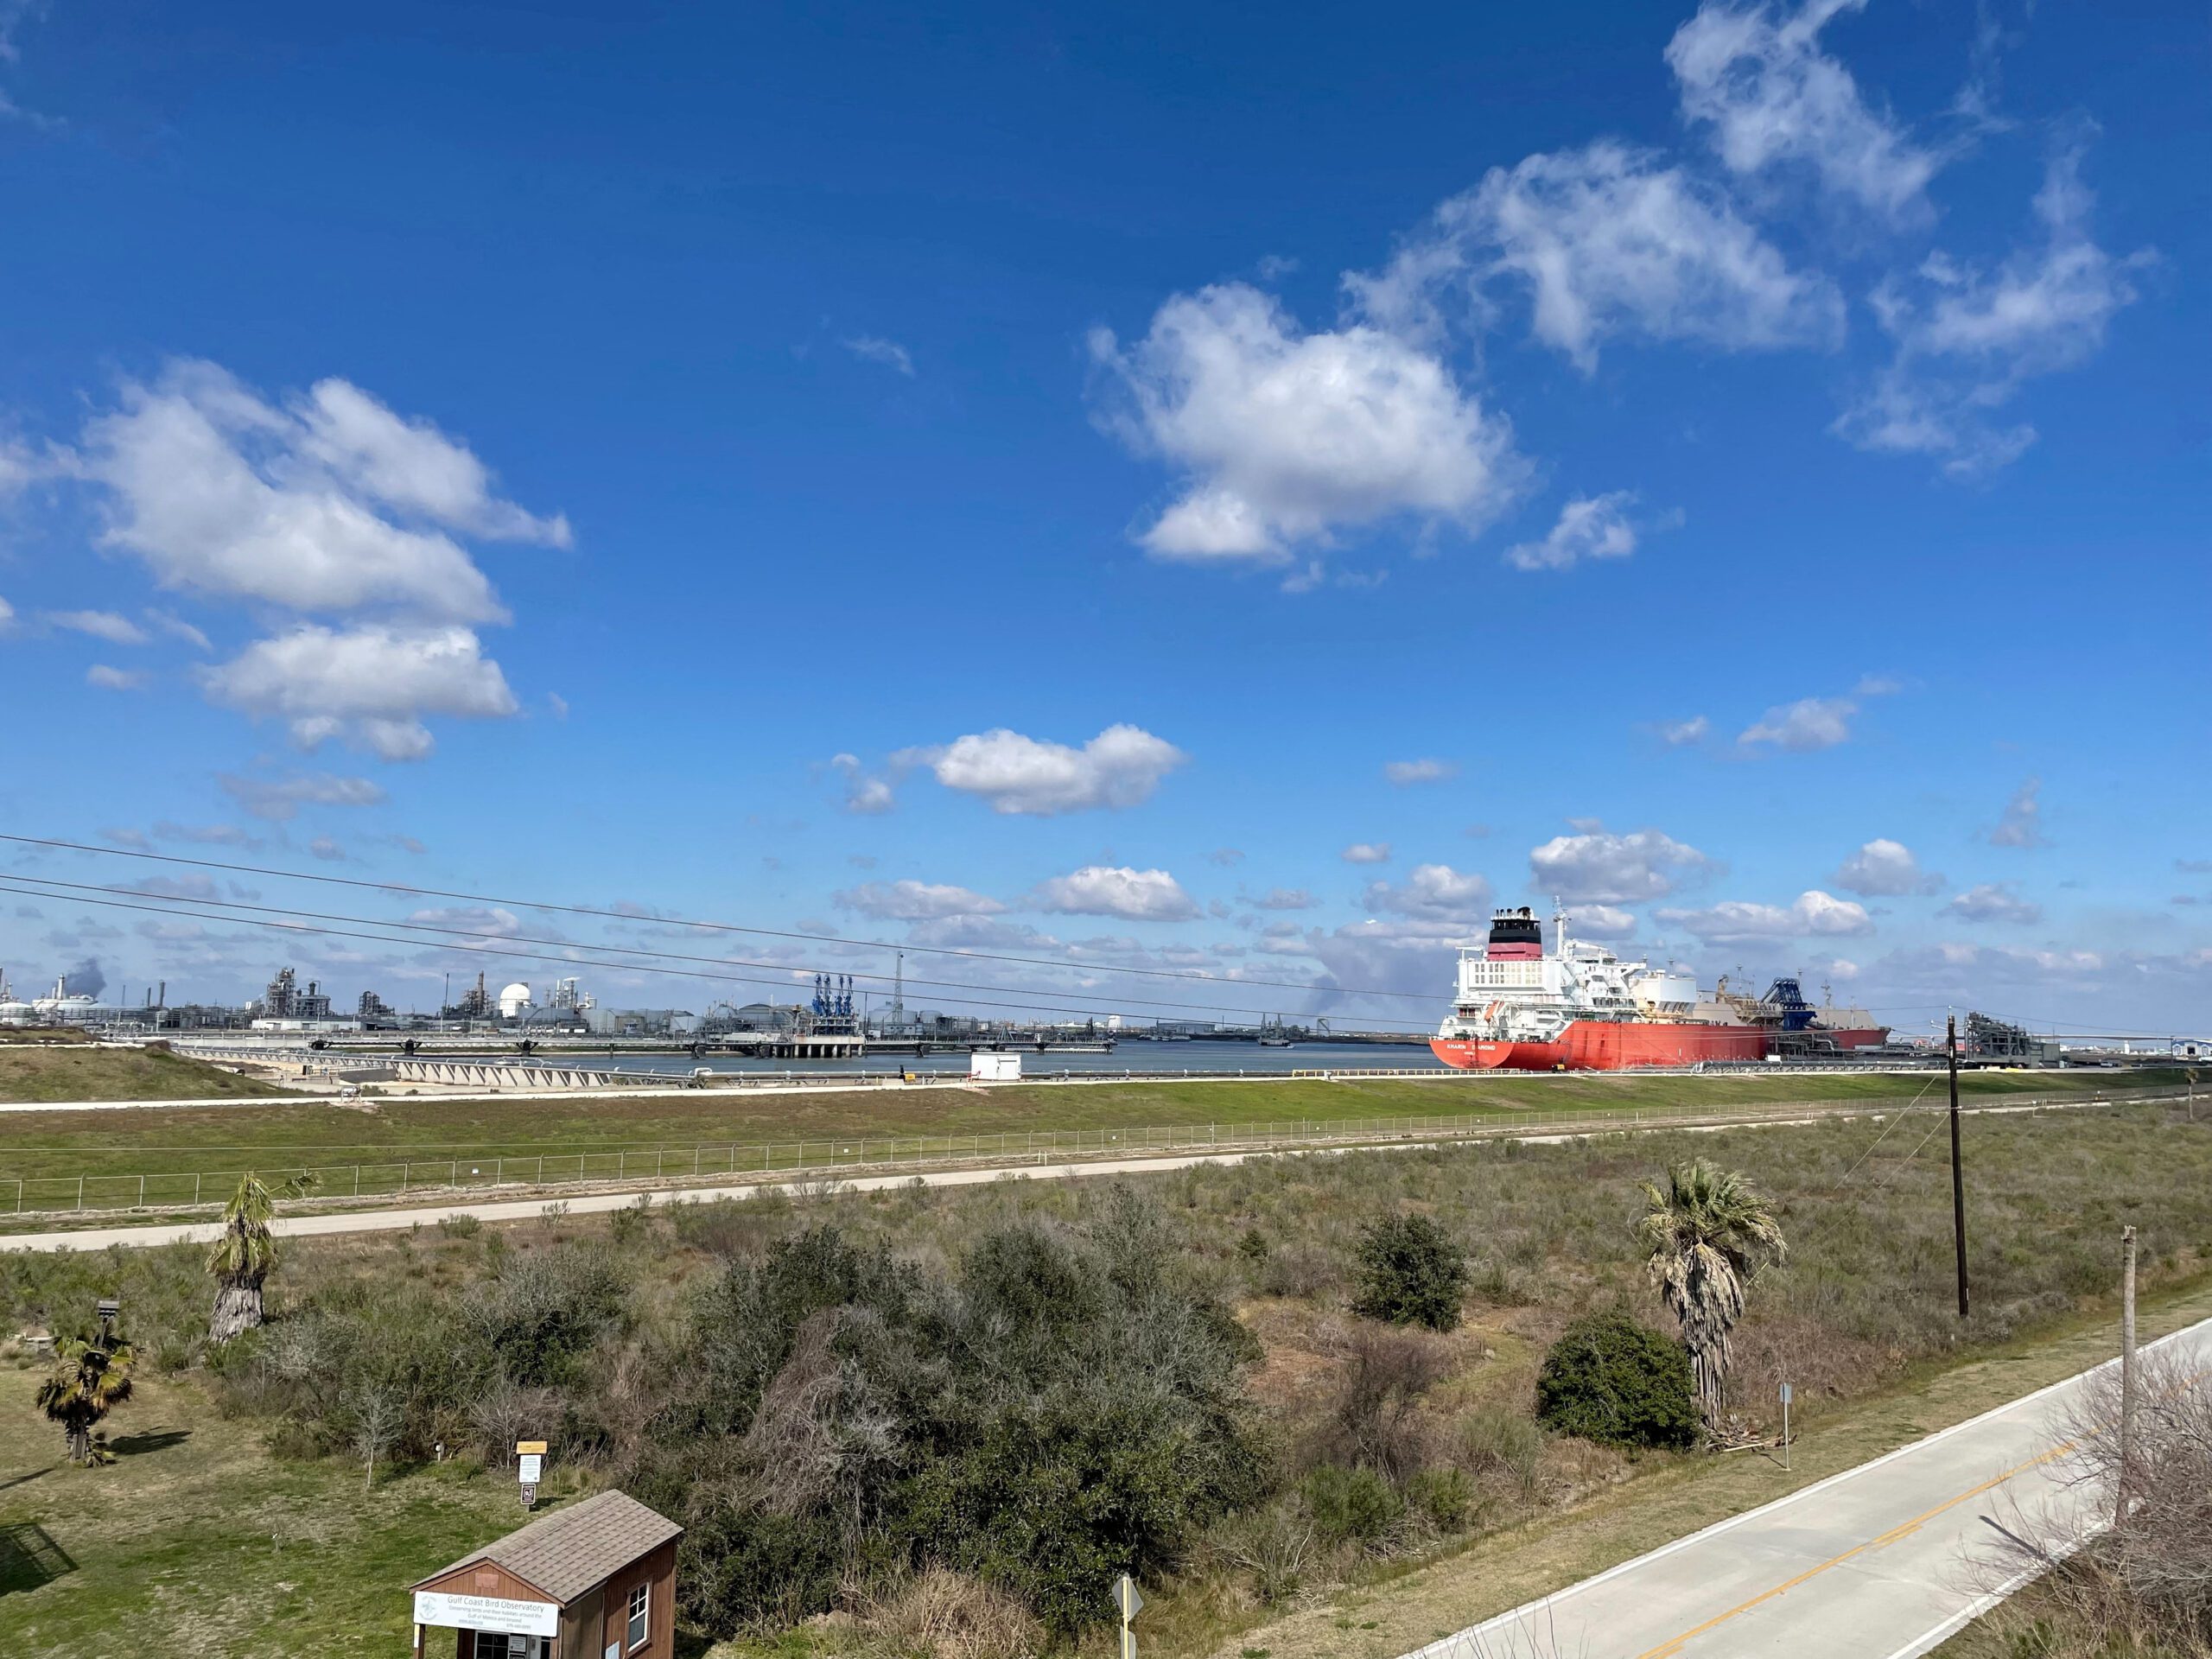 FILE PHOTO: Liquified natural gas vessel Kmarin Diamond, the LNG tanker in eight months to arrive at Freeport LNG fire-idled export plant, is seen at the facility in Freeport, Texas, U.S., February 11, 2023. REUTERS/Arathy Somasekhar/File Photo